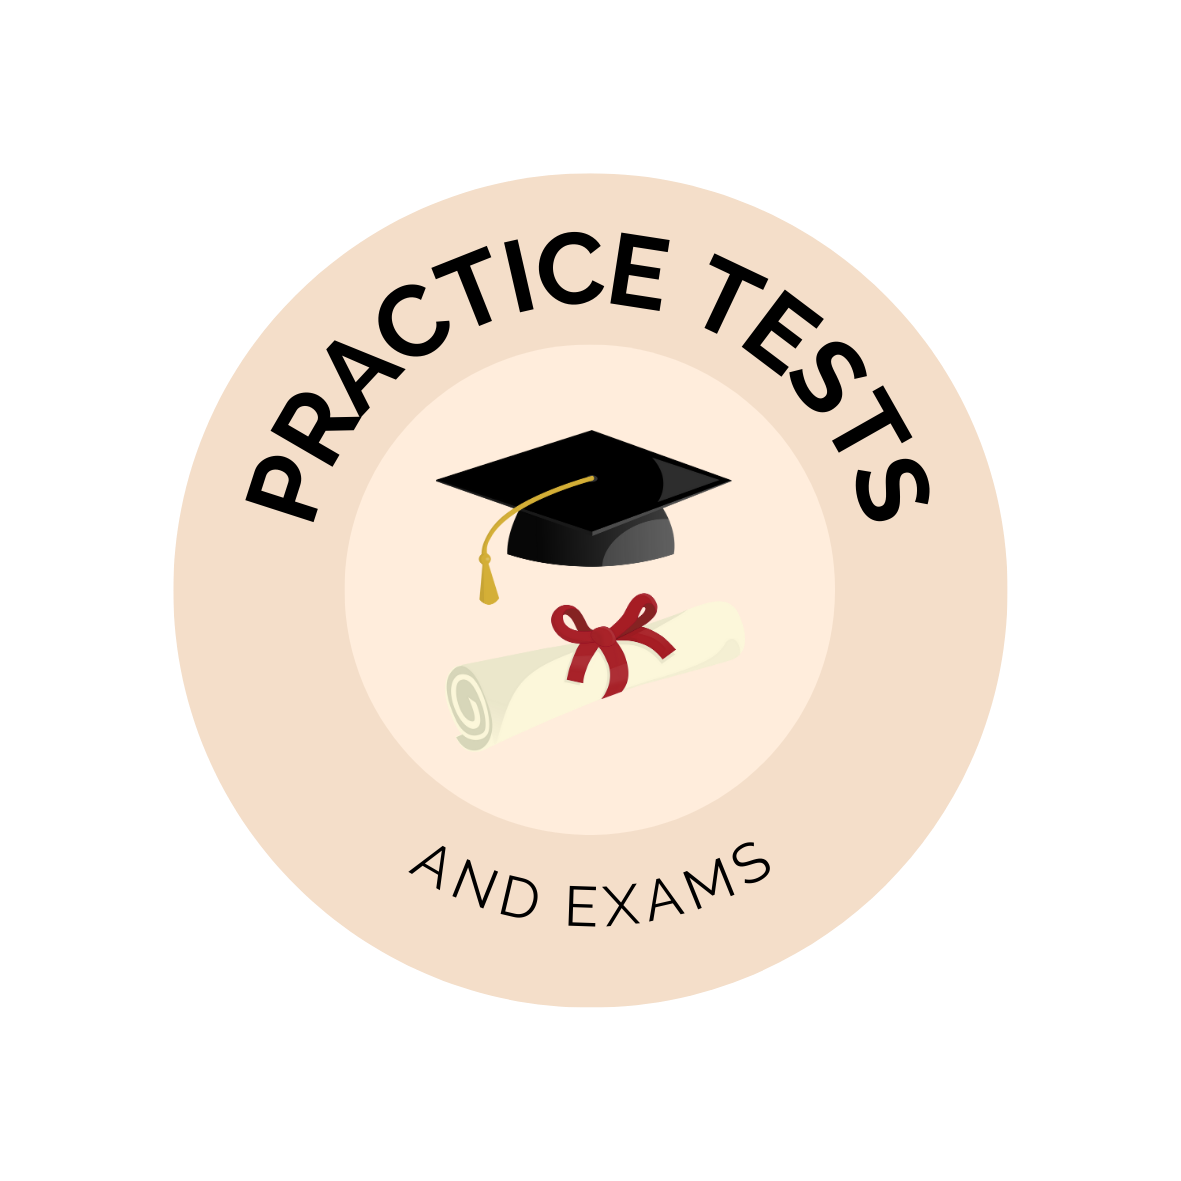 QASMT Selective School Practice tests and exams